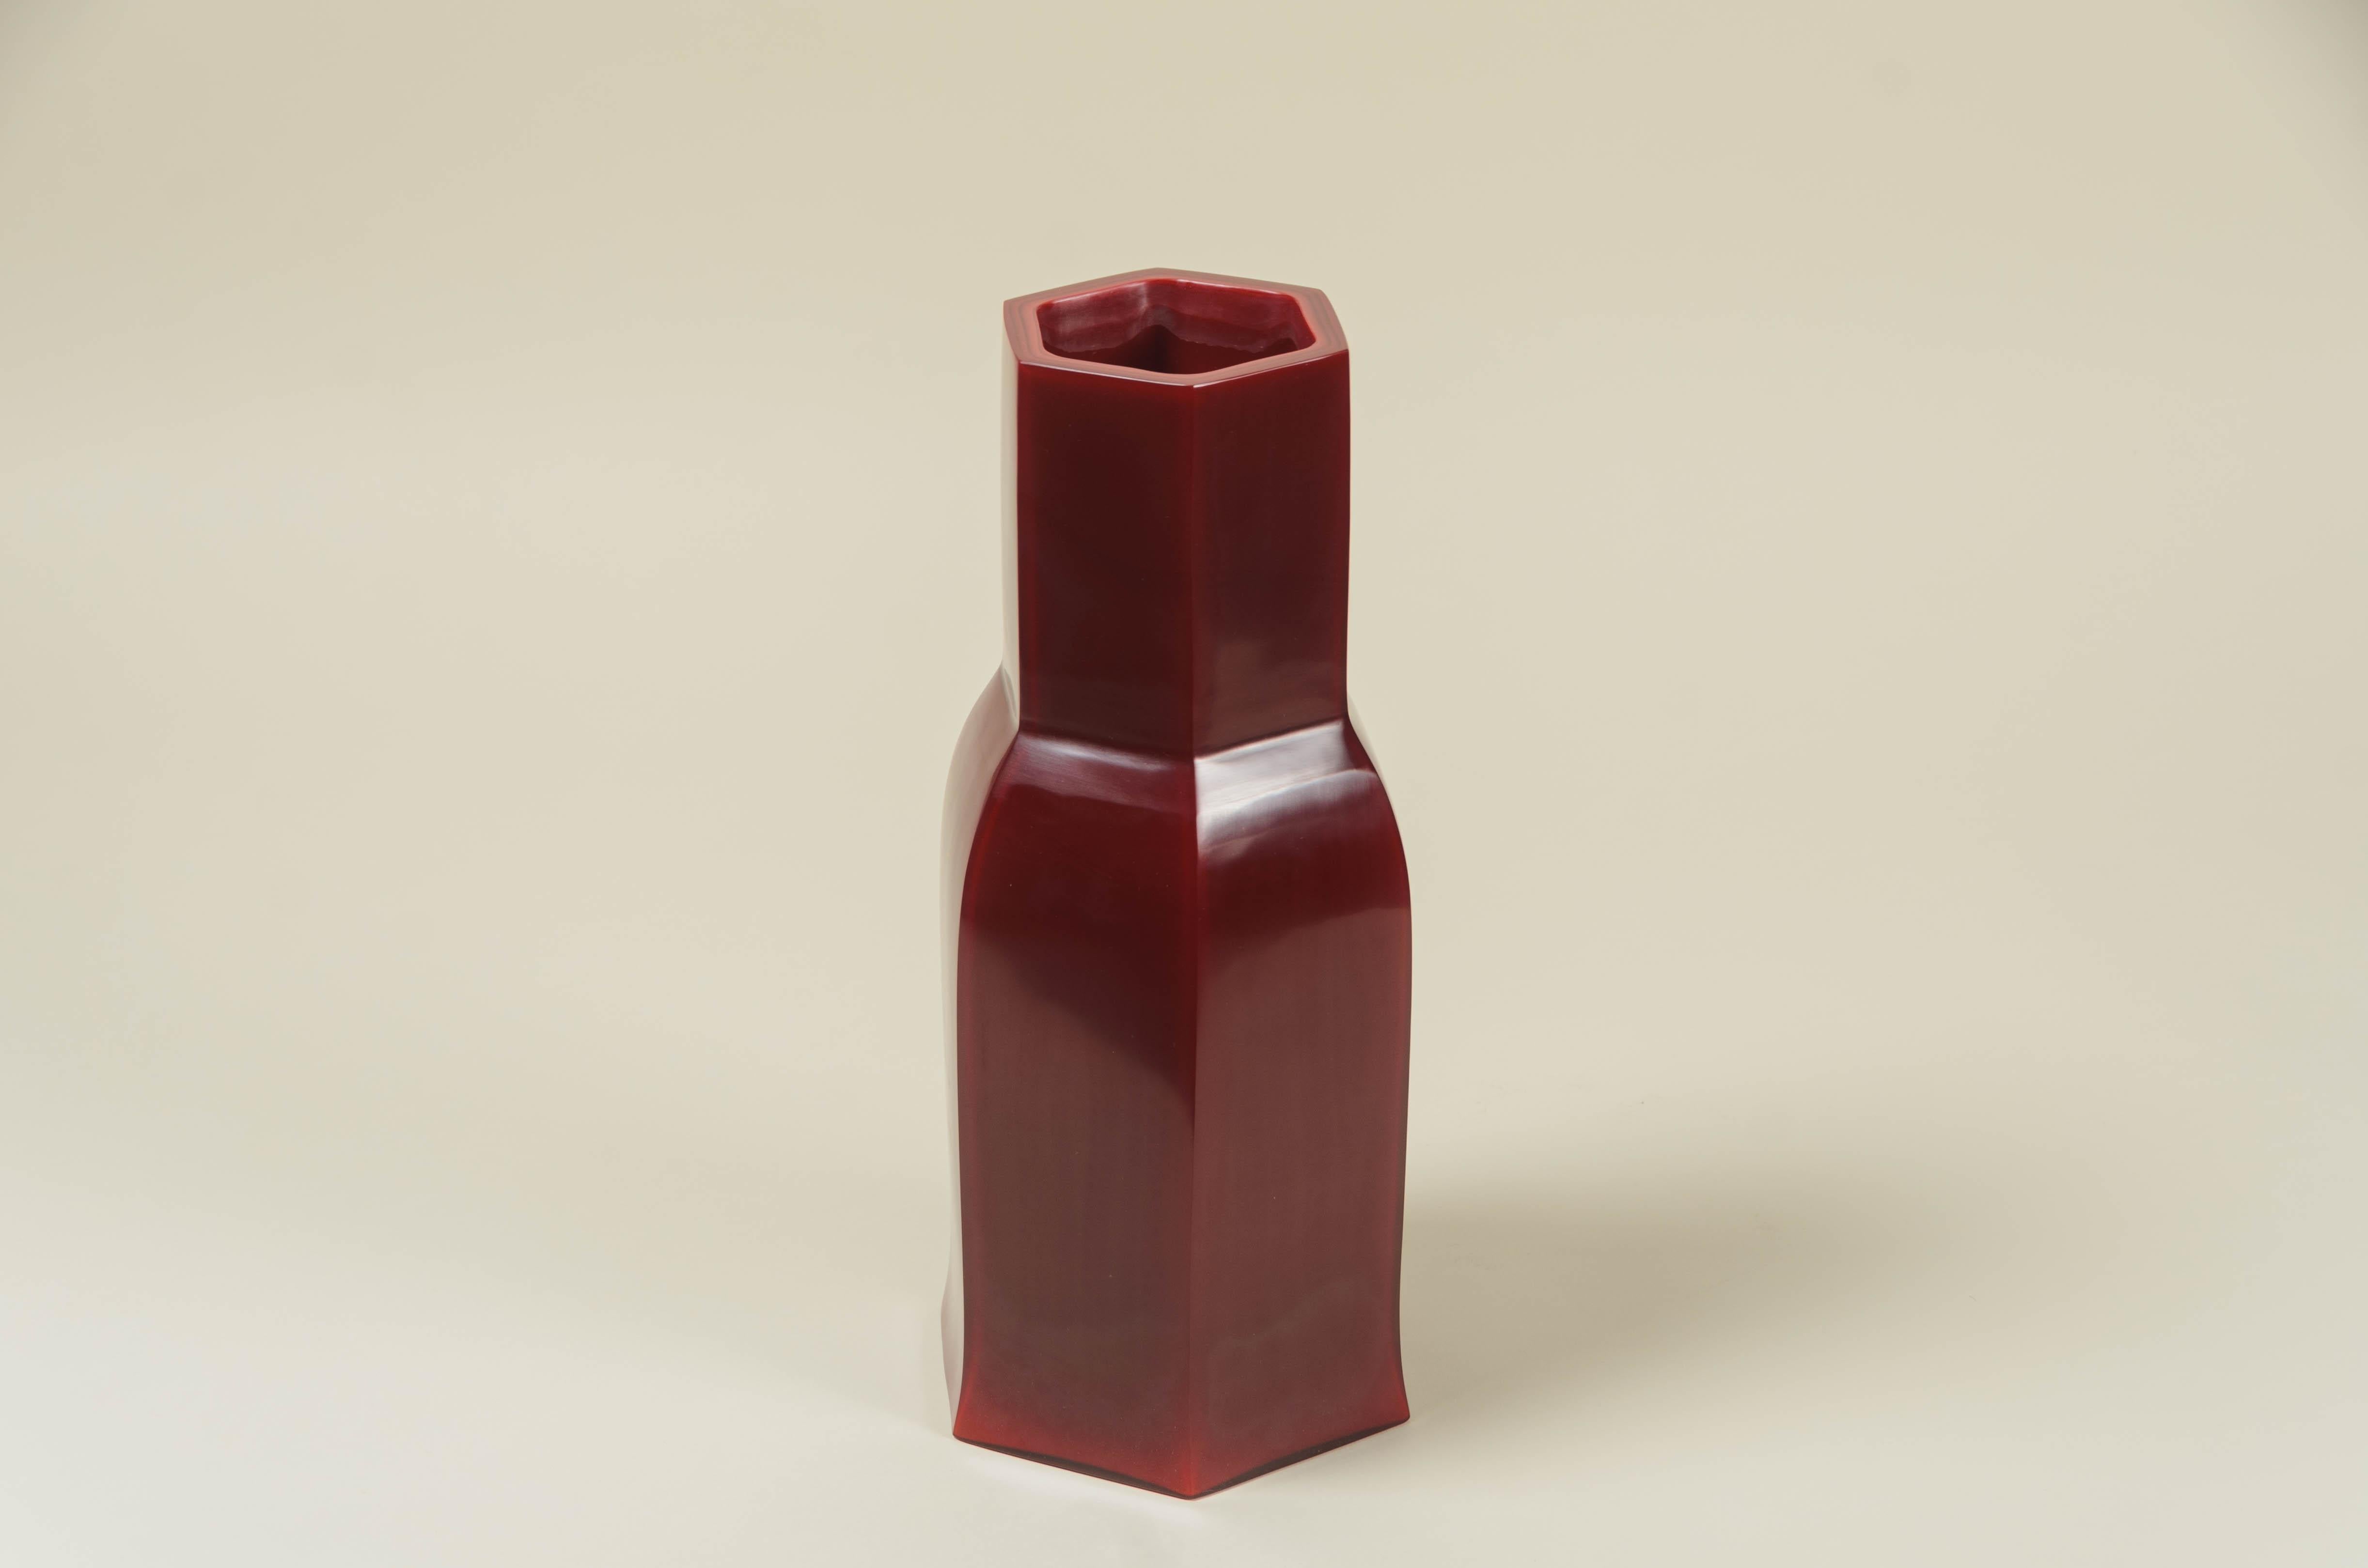 Hoof vase
Raspberry peking glass finish
Hand blown glass
Hand carved
Contemporary 
Limited Edition.

Peking glass refers to the high-quality glass art produced by the imperial and 
commercial workshops in Beijing during the Ching Dynasty,